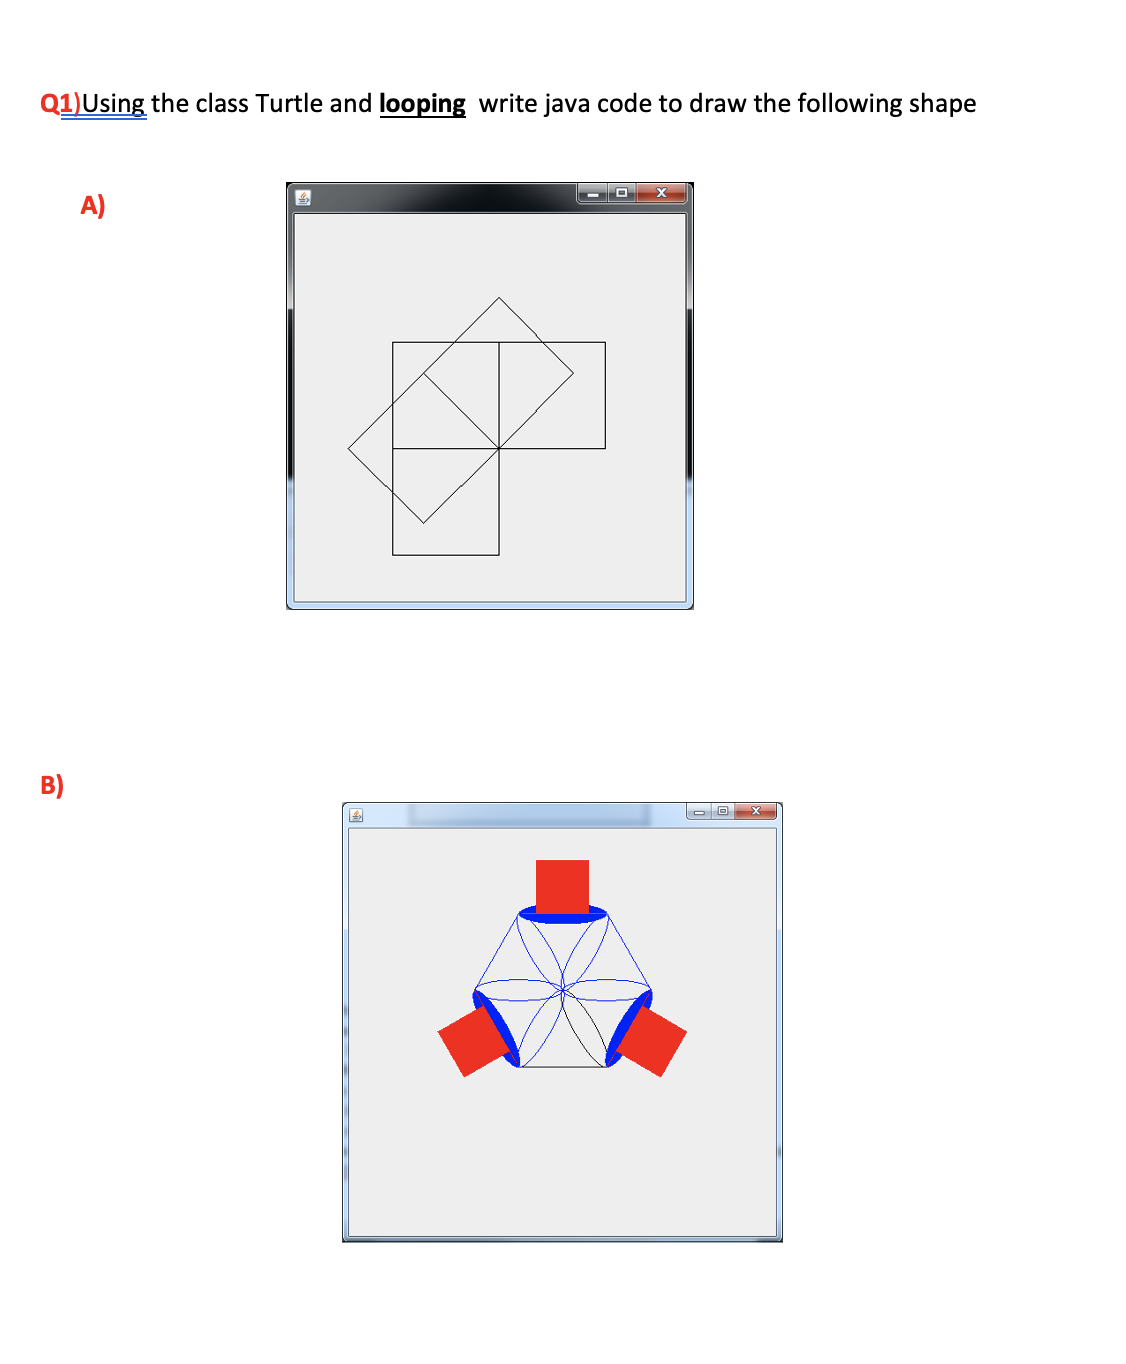 Q1)Using the class Turtle and looping write java code to draw the following shape
A)
B)
